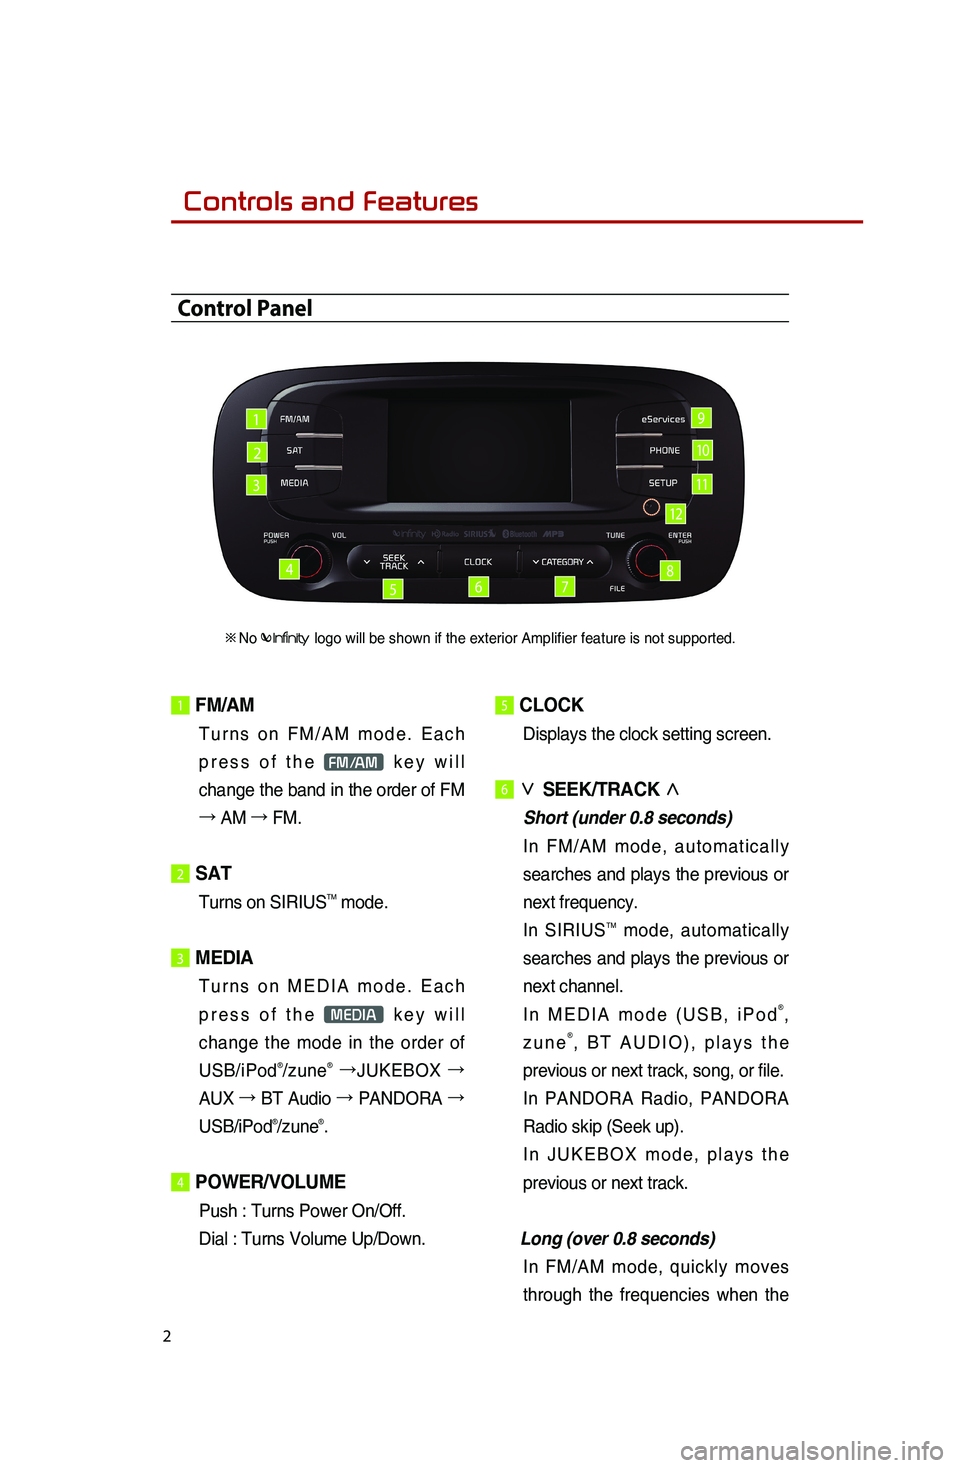 KIA SOUL 2015  Quick Reference Guide 2
1 FM/AM
 
Turns on FM/AM mode. Each 
press of the 
FM/AM key will 
change the band in the order of FM 
→  AM  →
 FM.
2  SAT
Turns on SIRIUSTM mode. 
3 MEDIA 
Turns on MEDIA mode. Each 
press of 